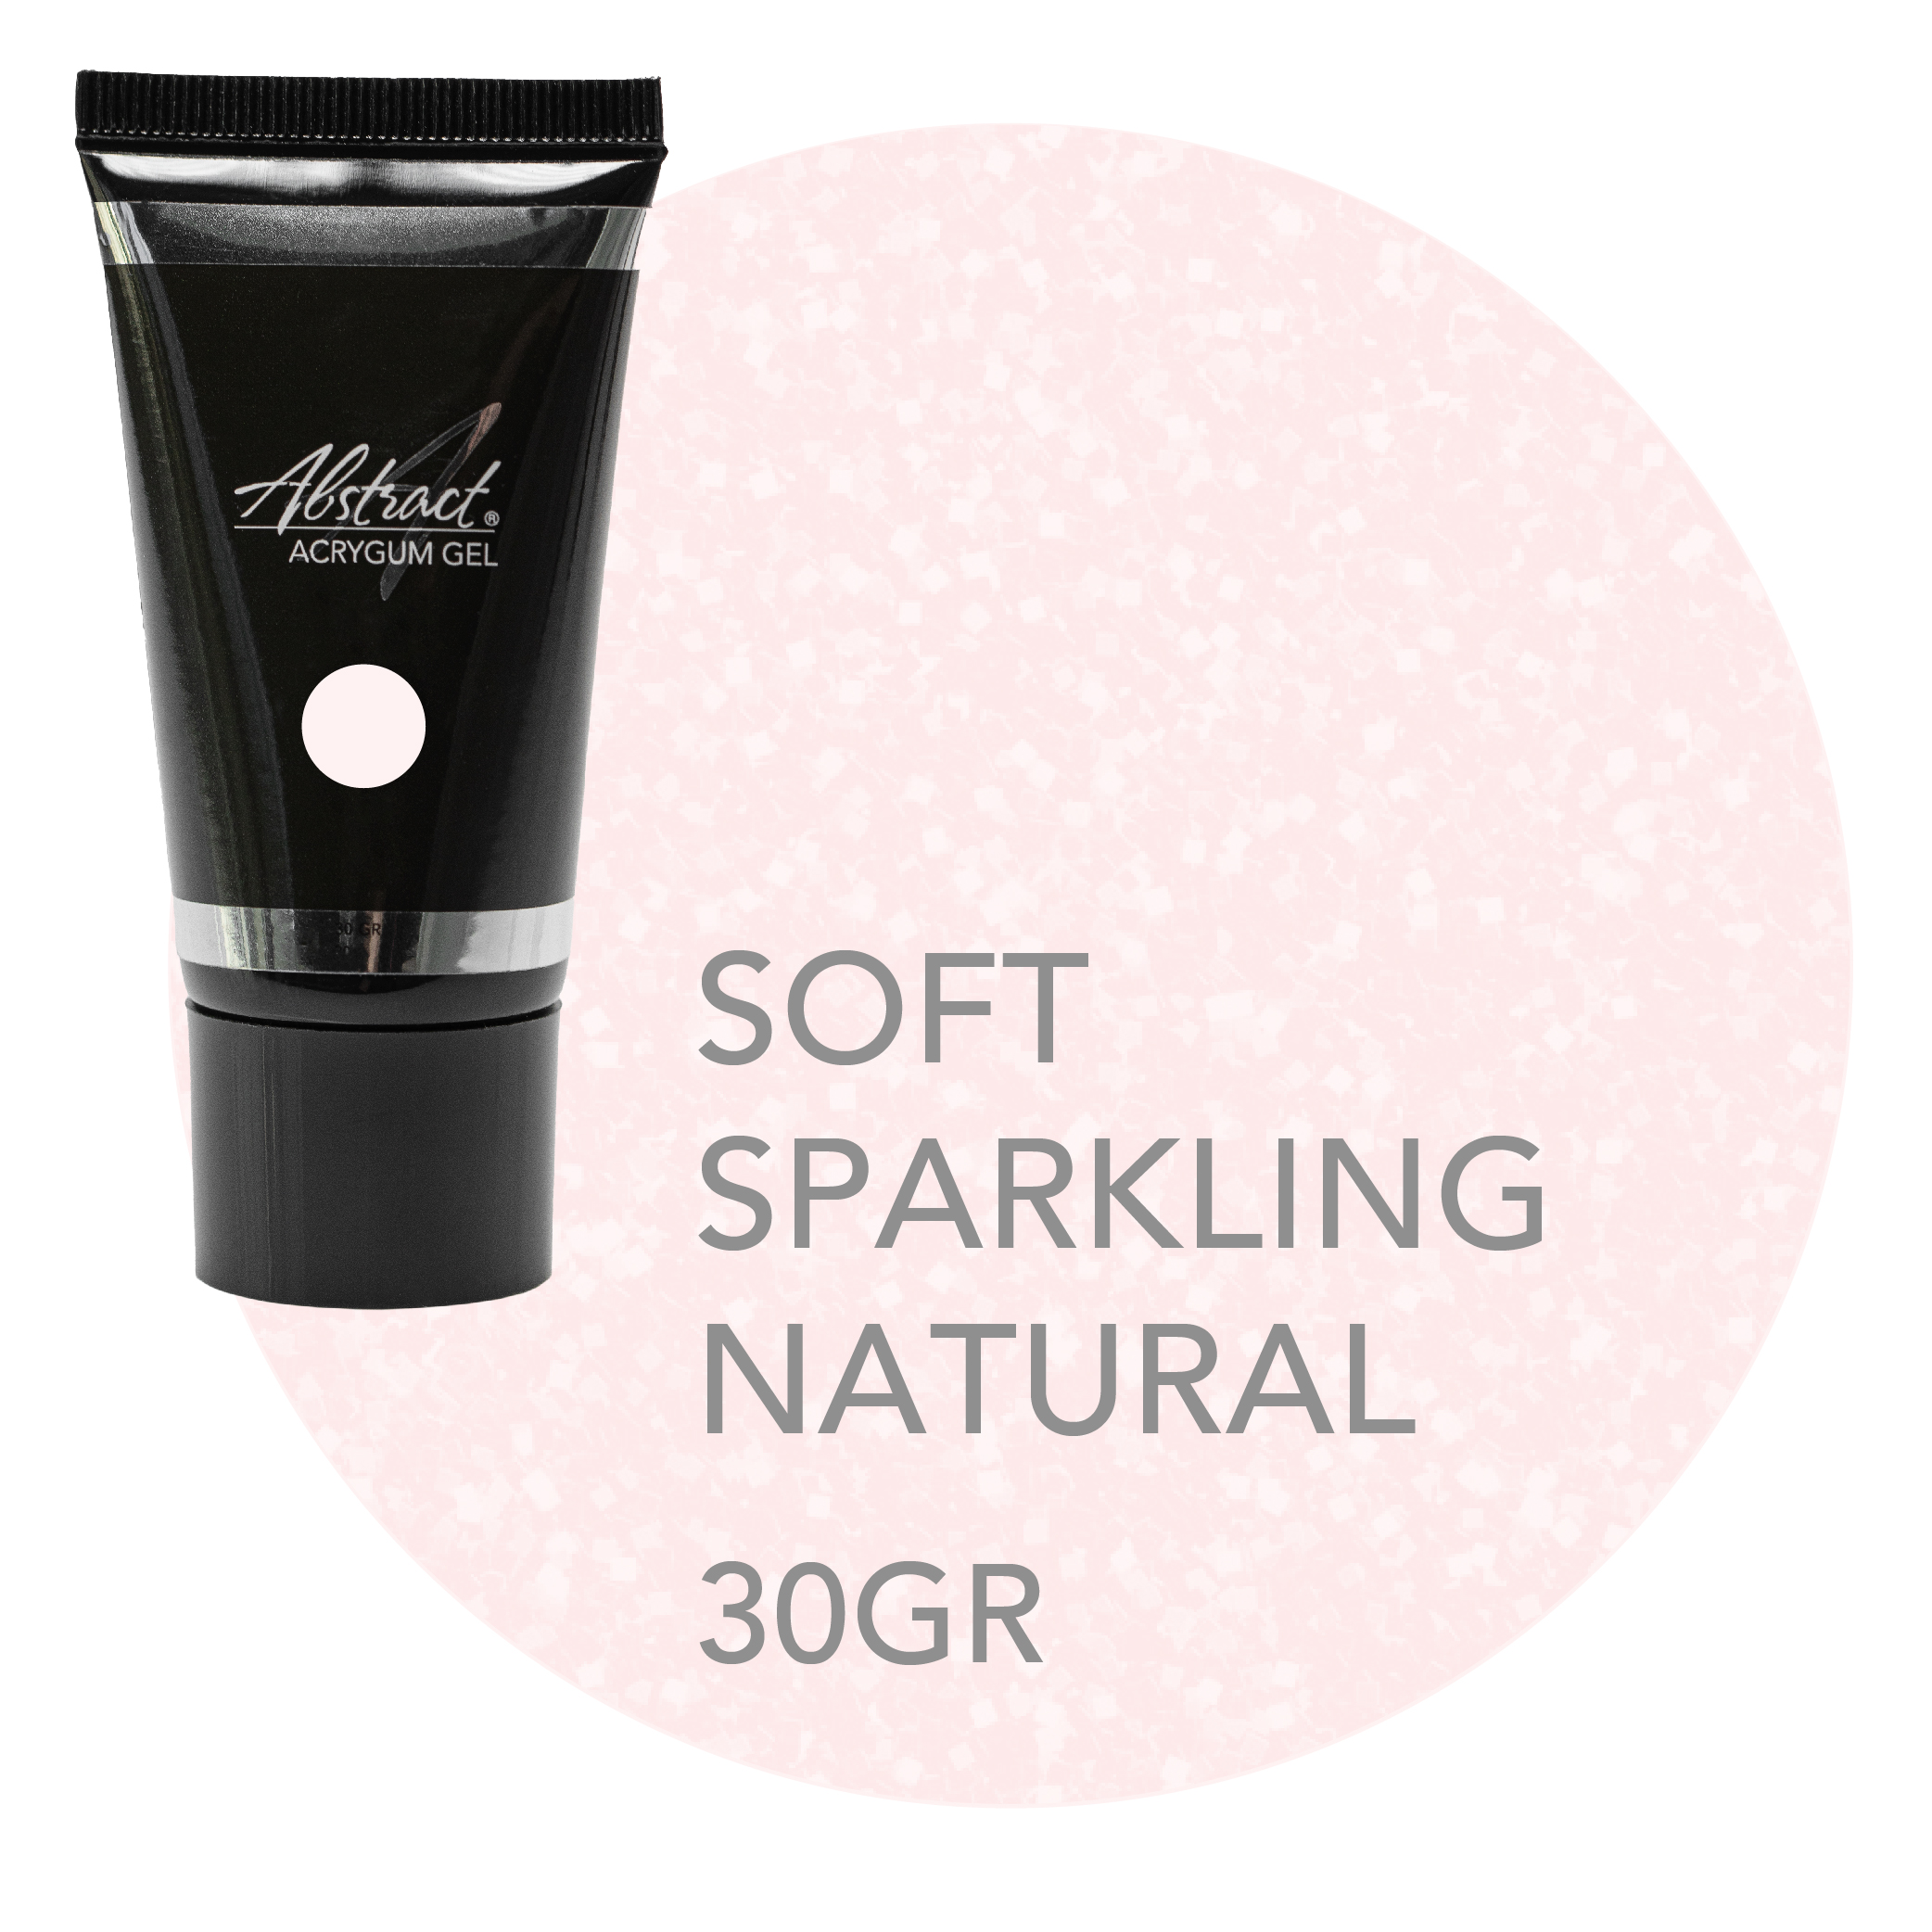 AcryGum SOFT SPARKLING NATURAL 30gr (tube), Abstract | 312543